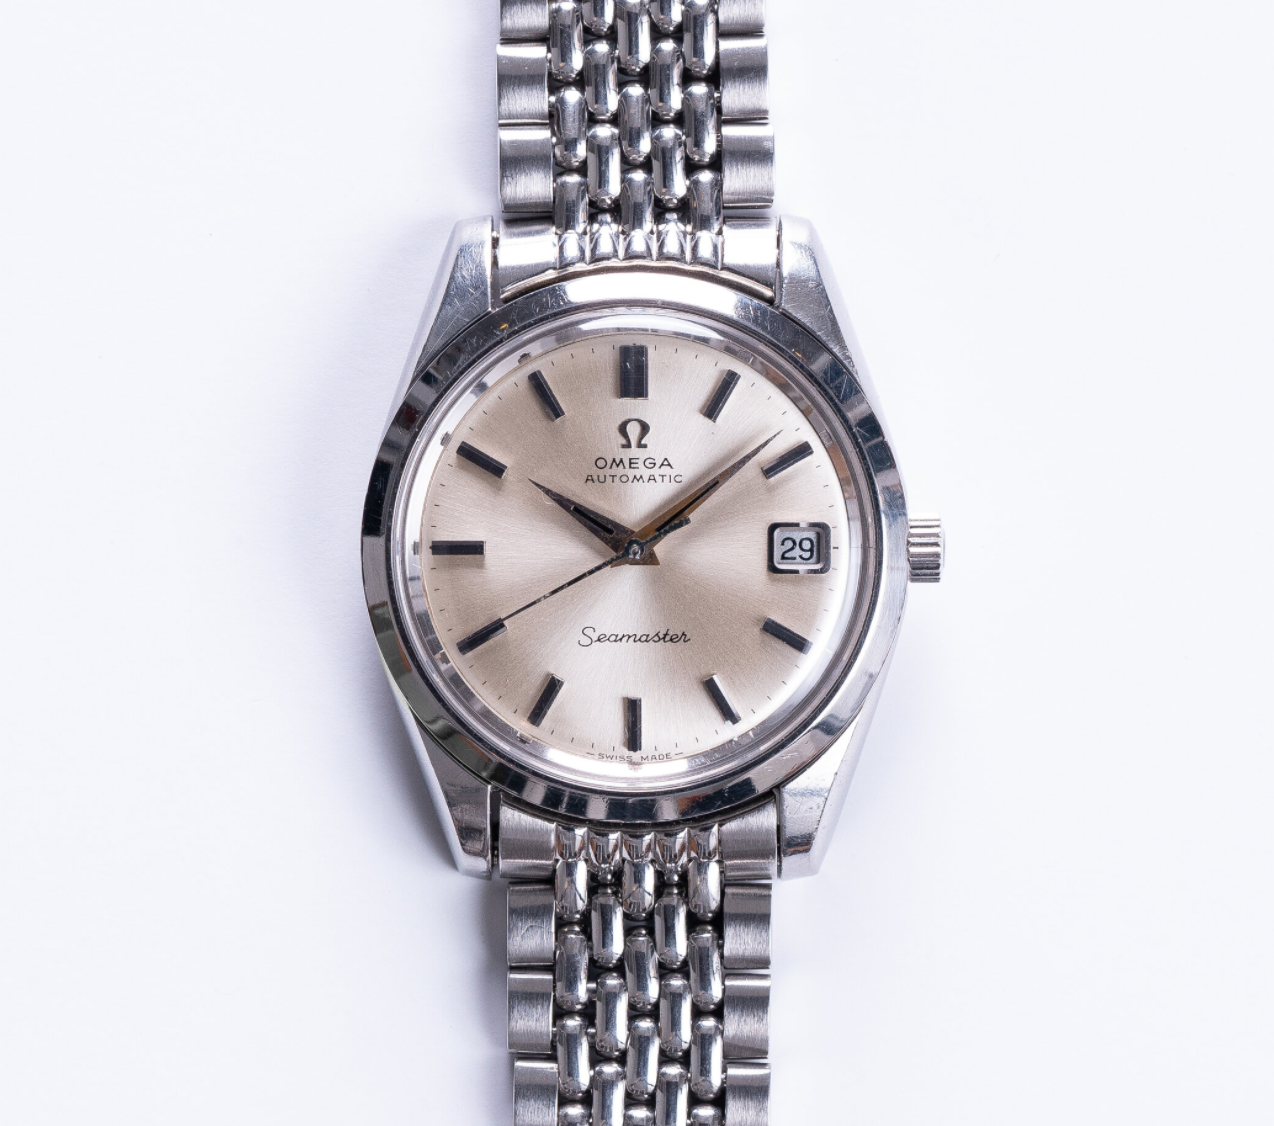 A Brief Guide to Vintage Omega Watches